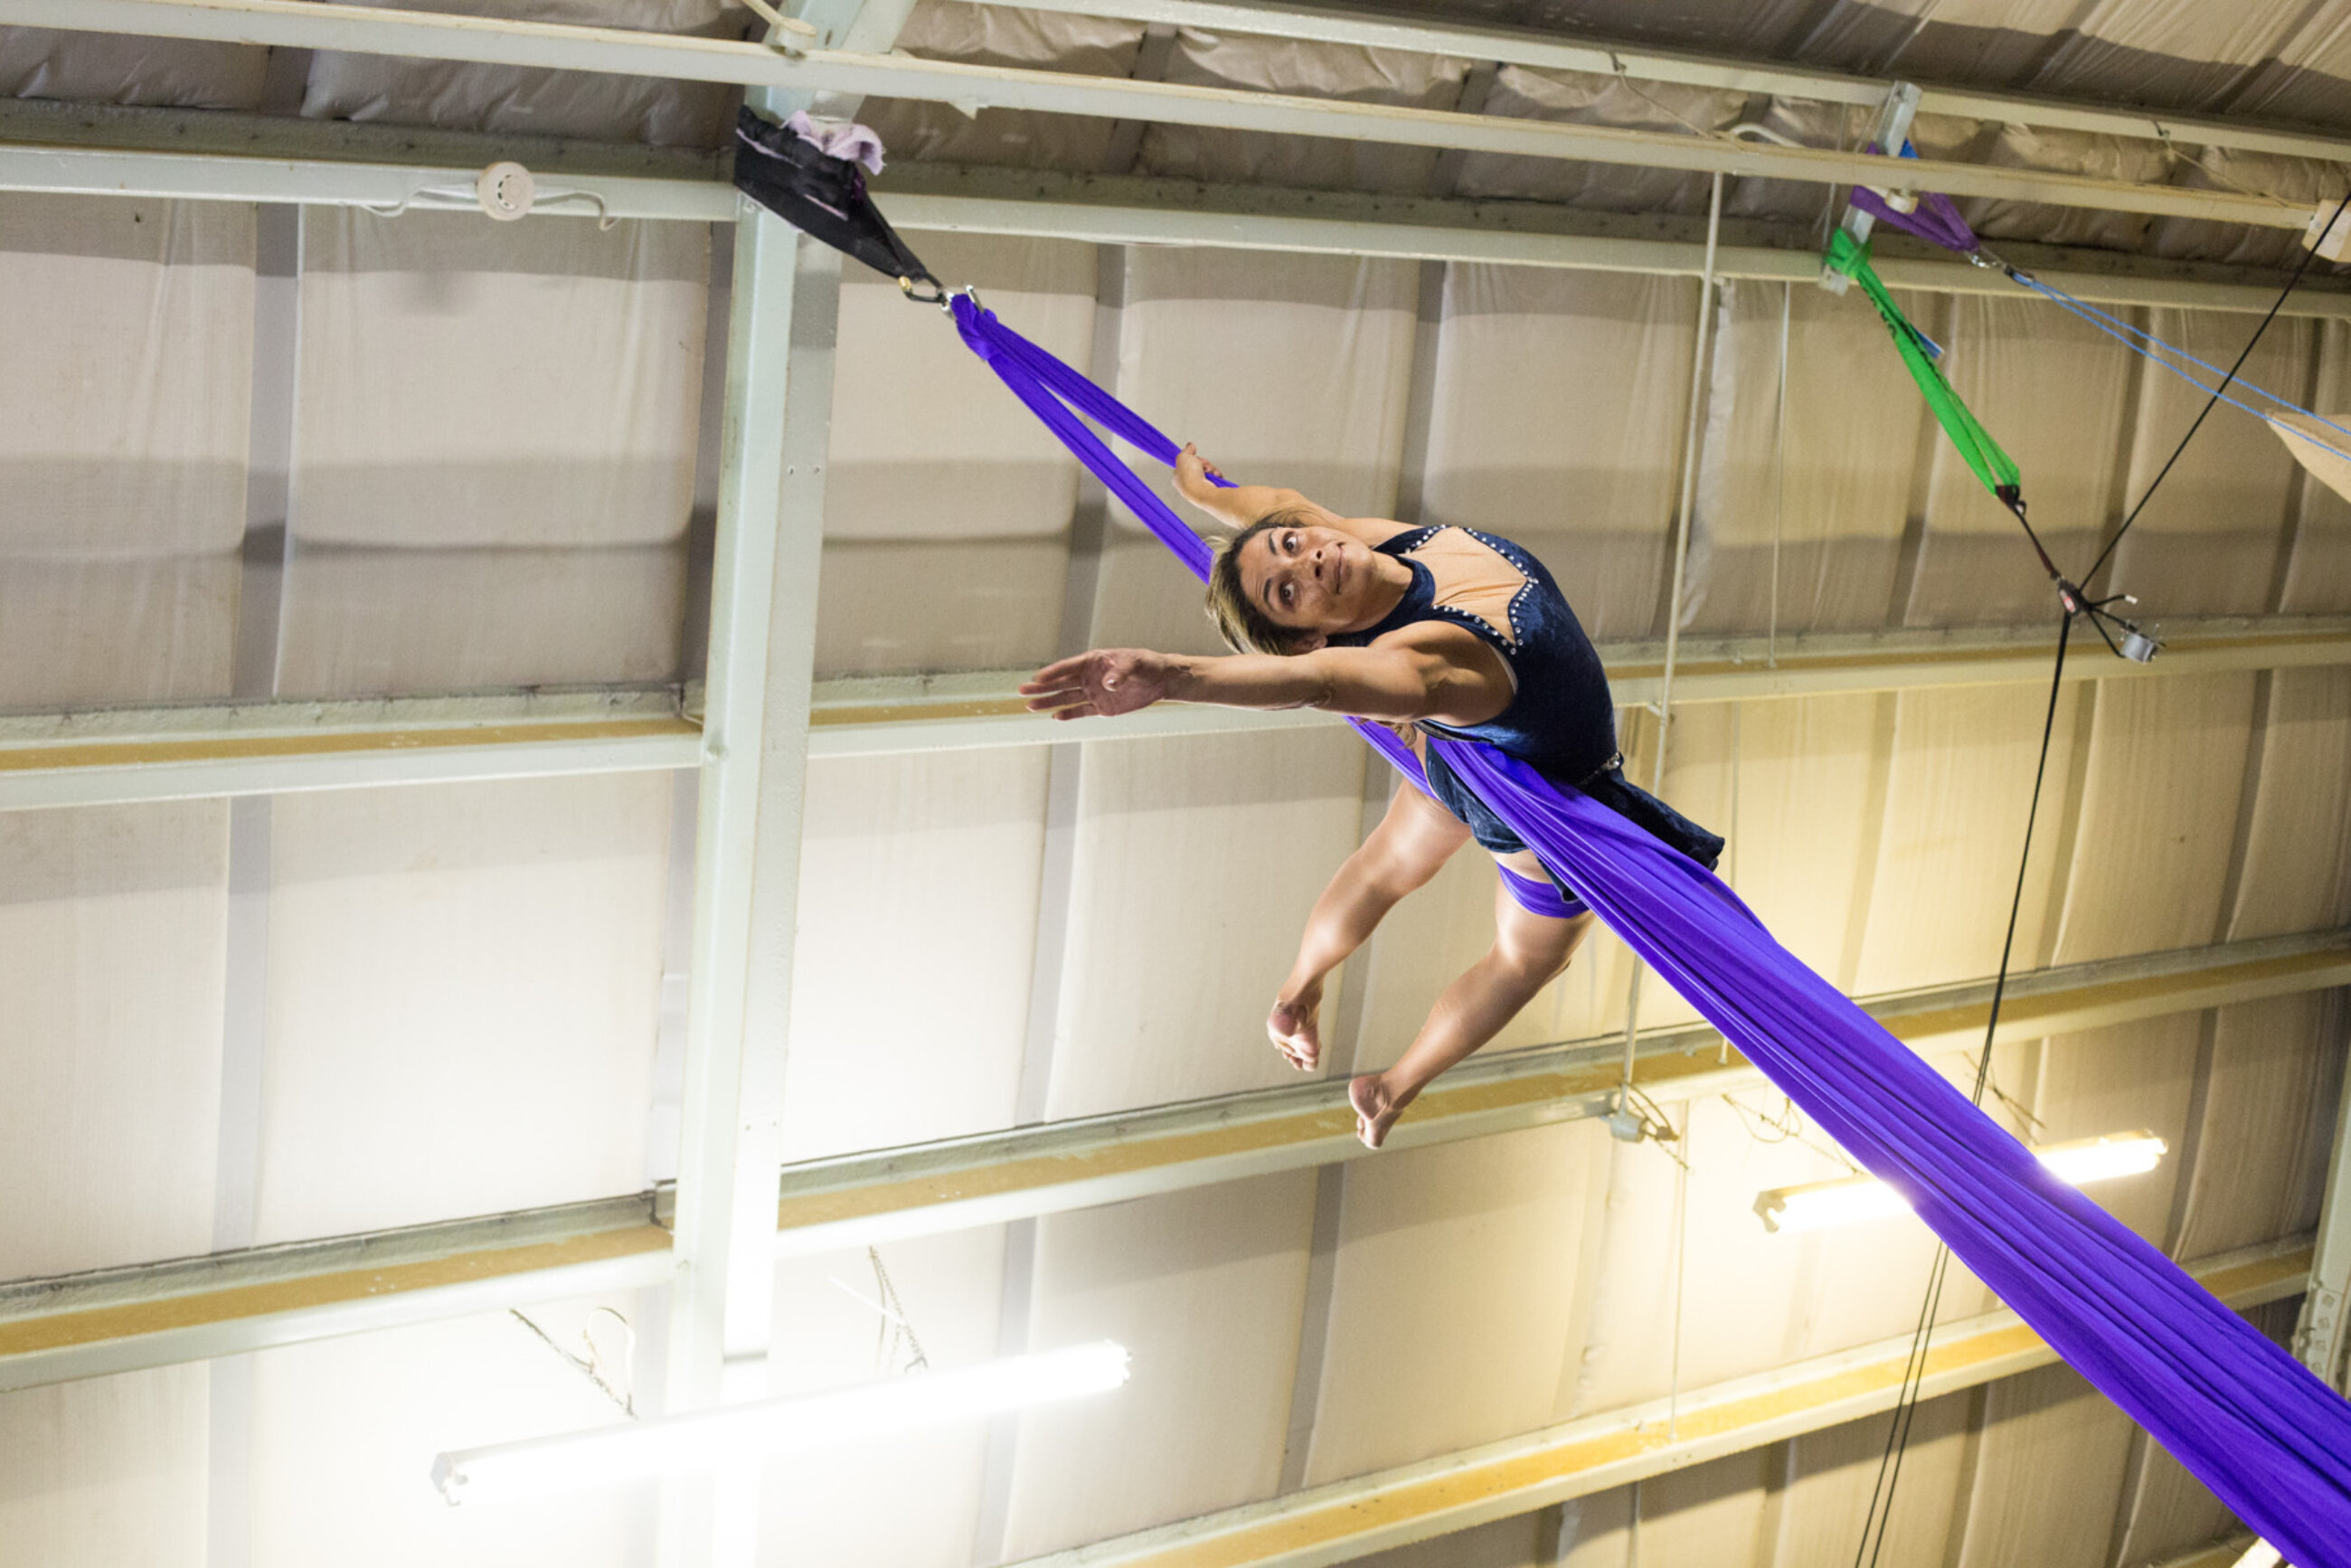 Aerial artist training on aerial silks holding a crescent pose with body. Image taken from ground looking up.